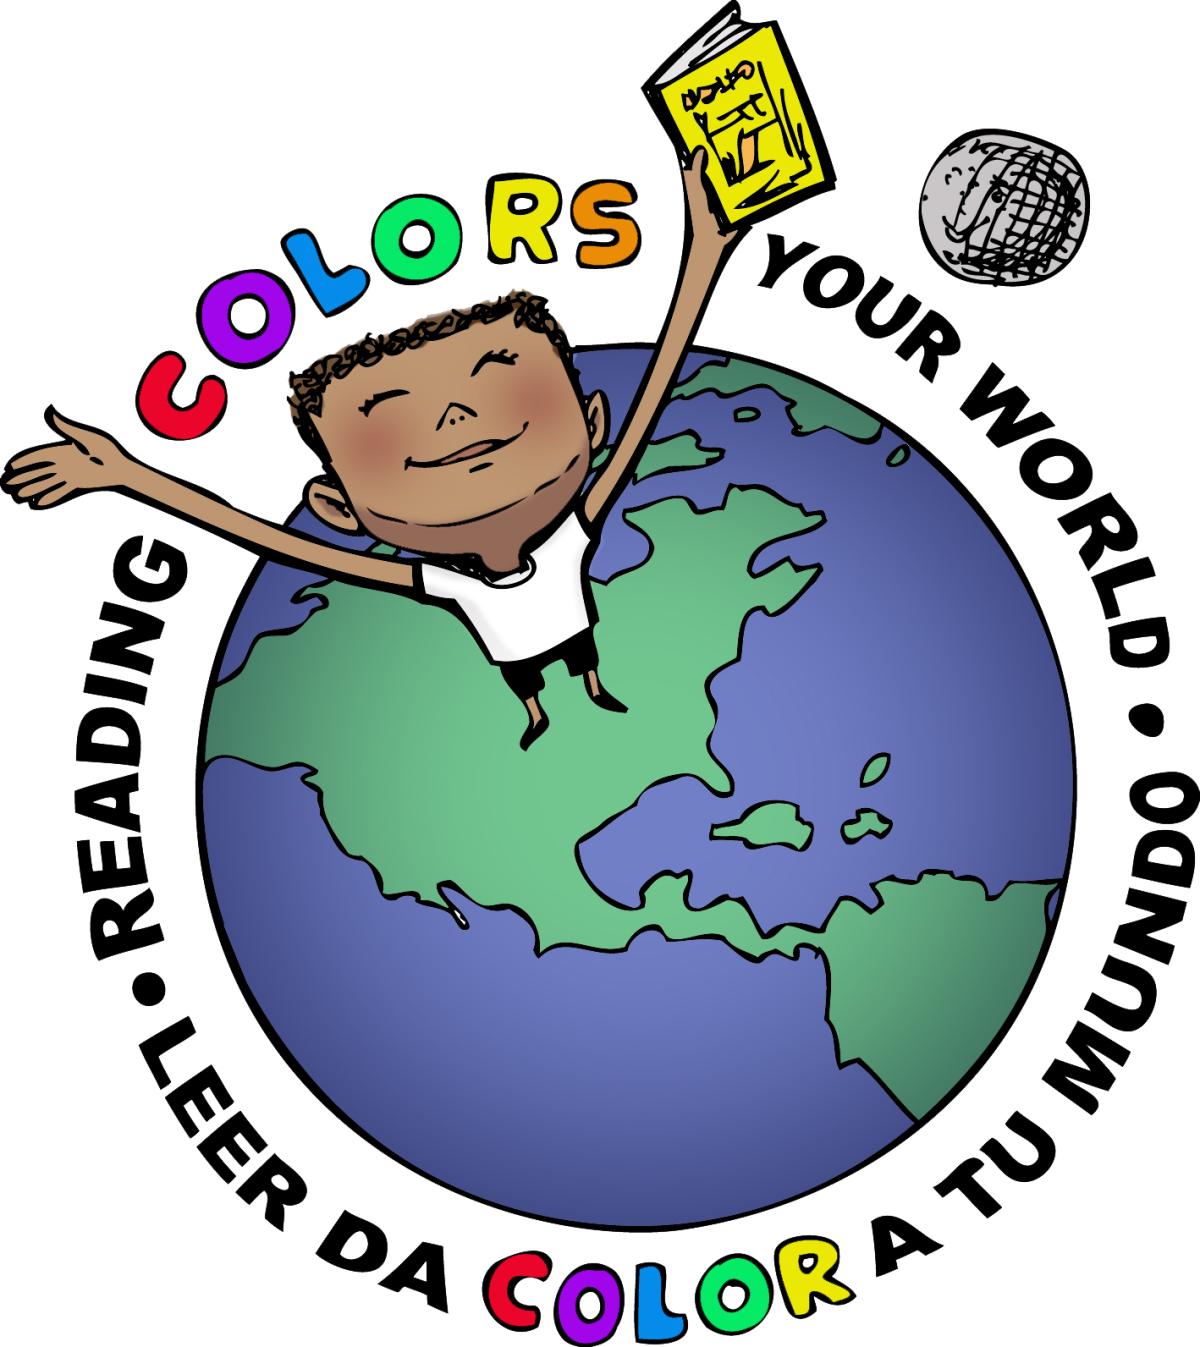 Reading colors your world globe with slogan in English and Spanish 